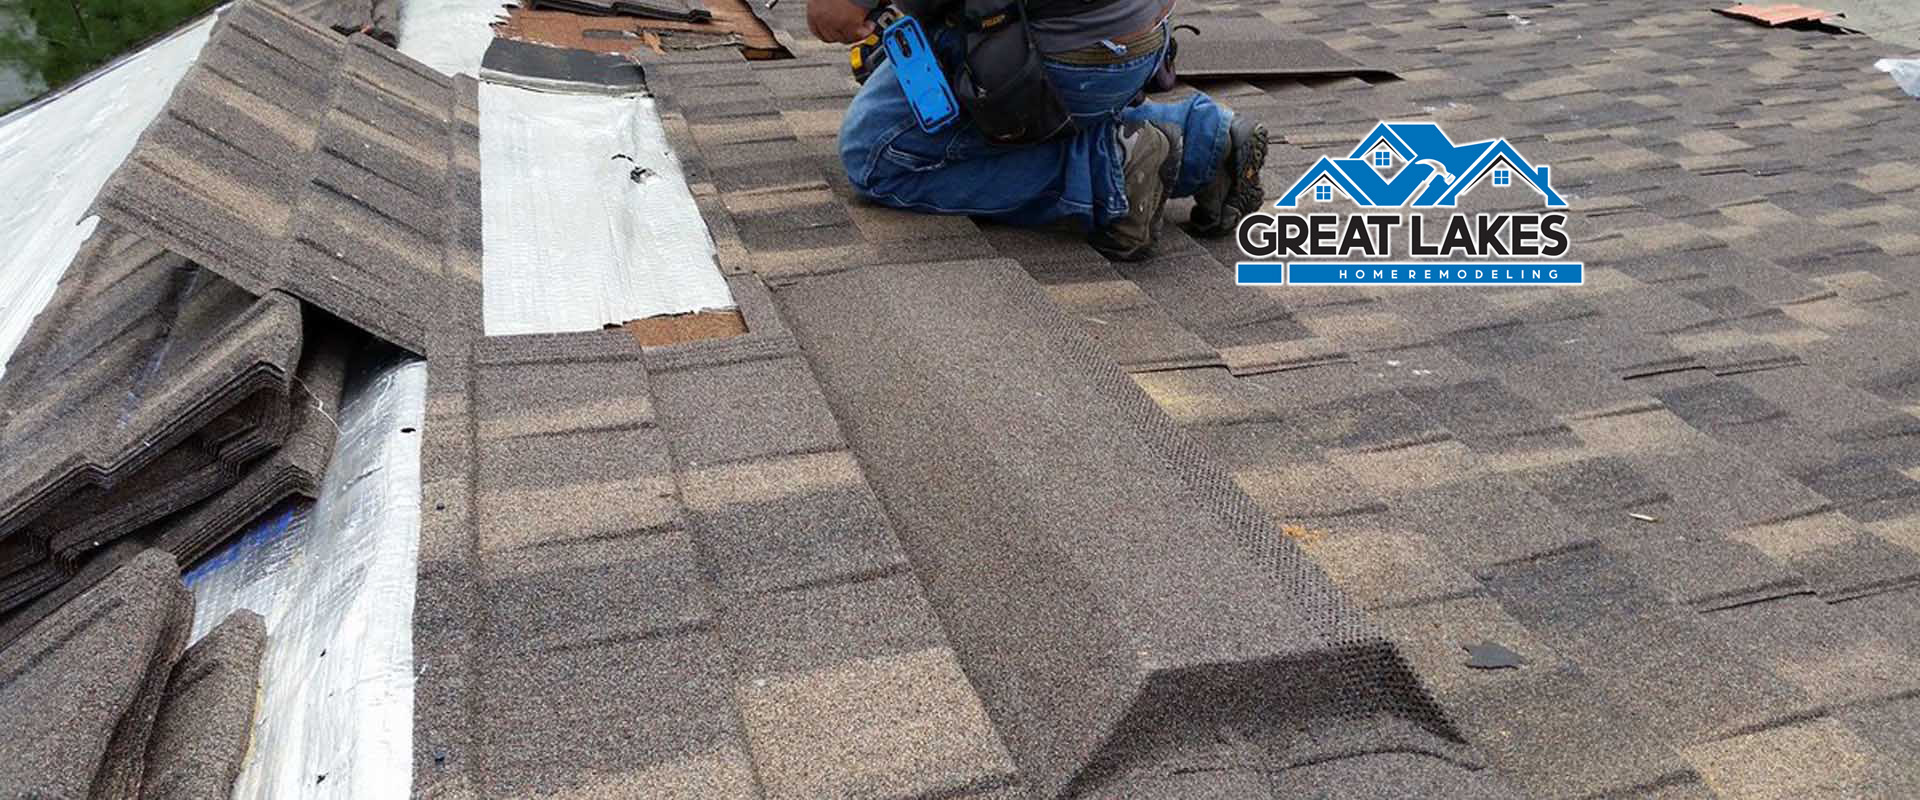 Professional Roofing Solution in Ohio, Michigan and Indiana